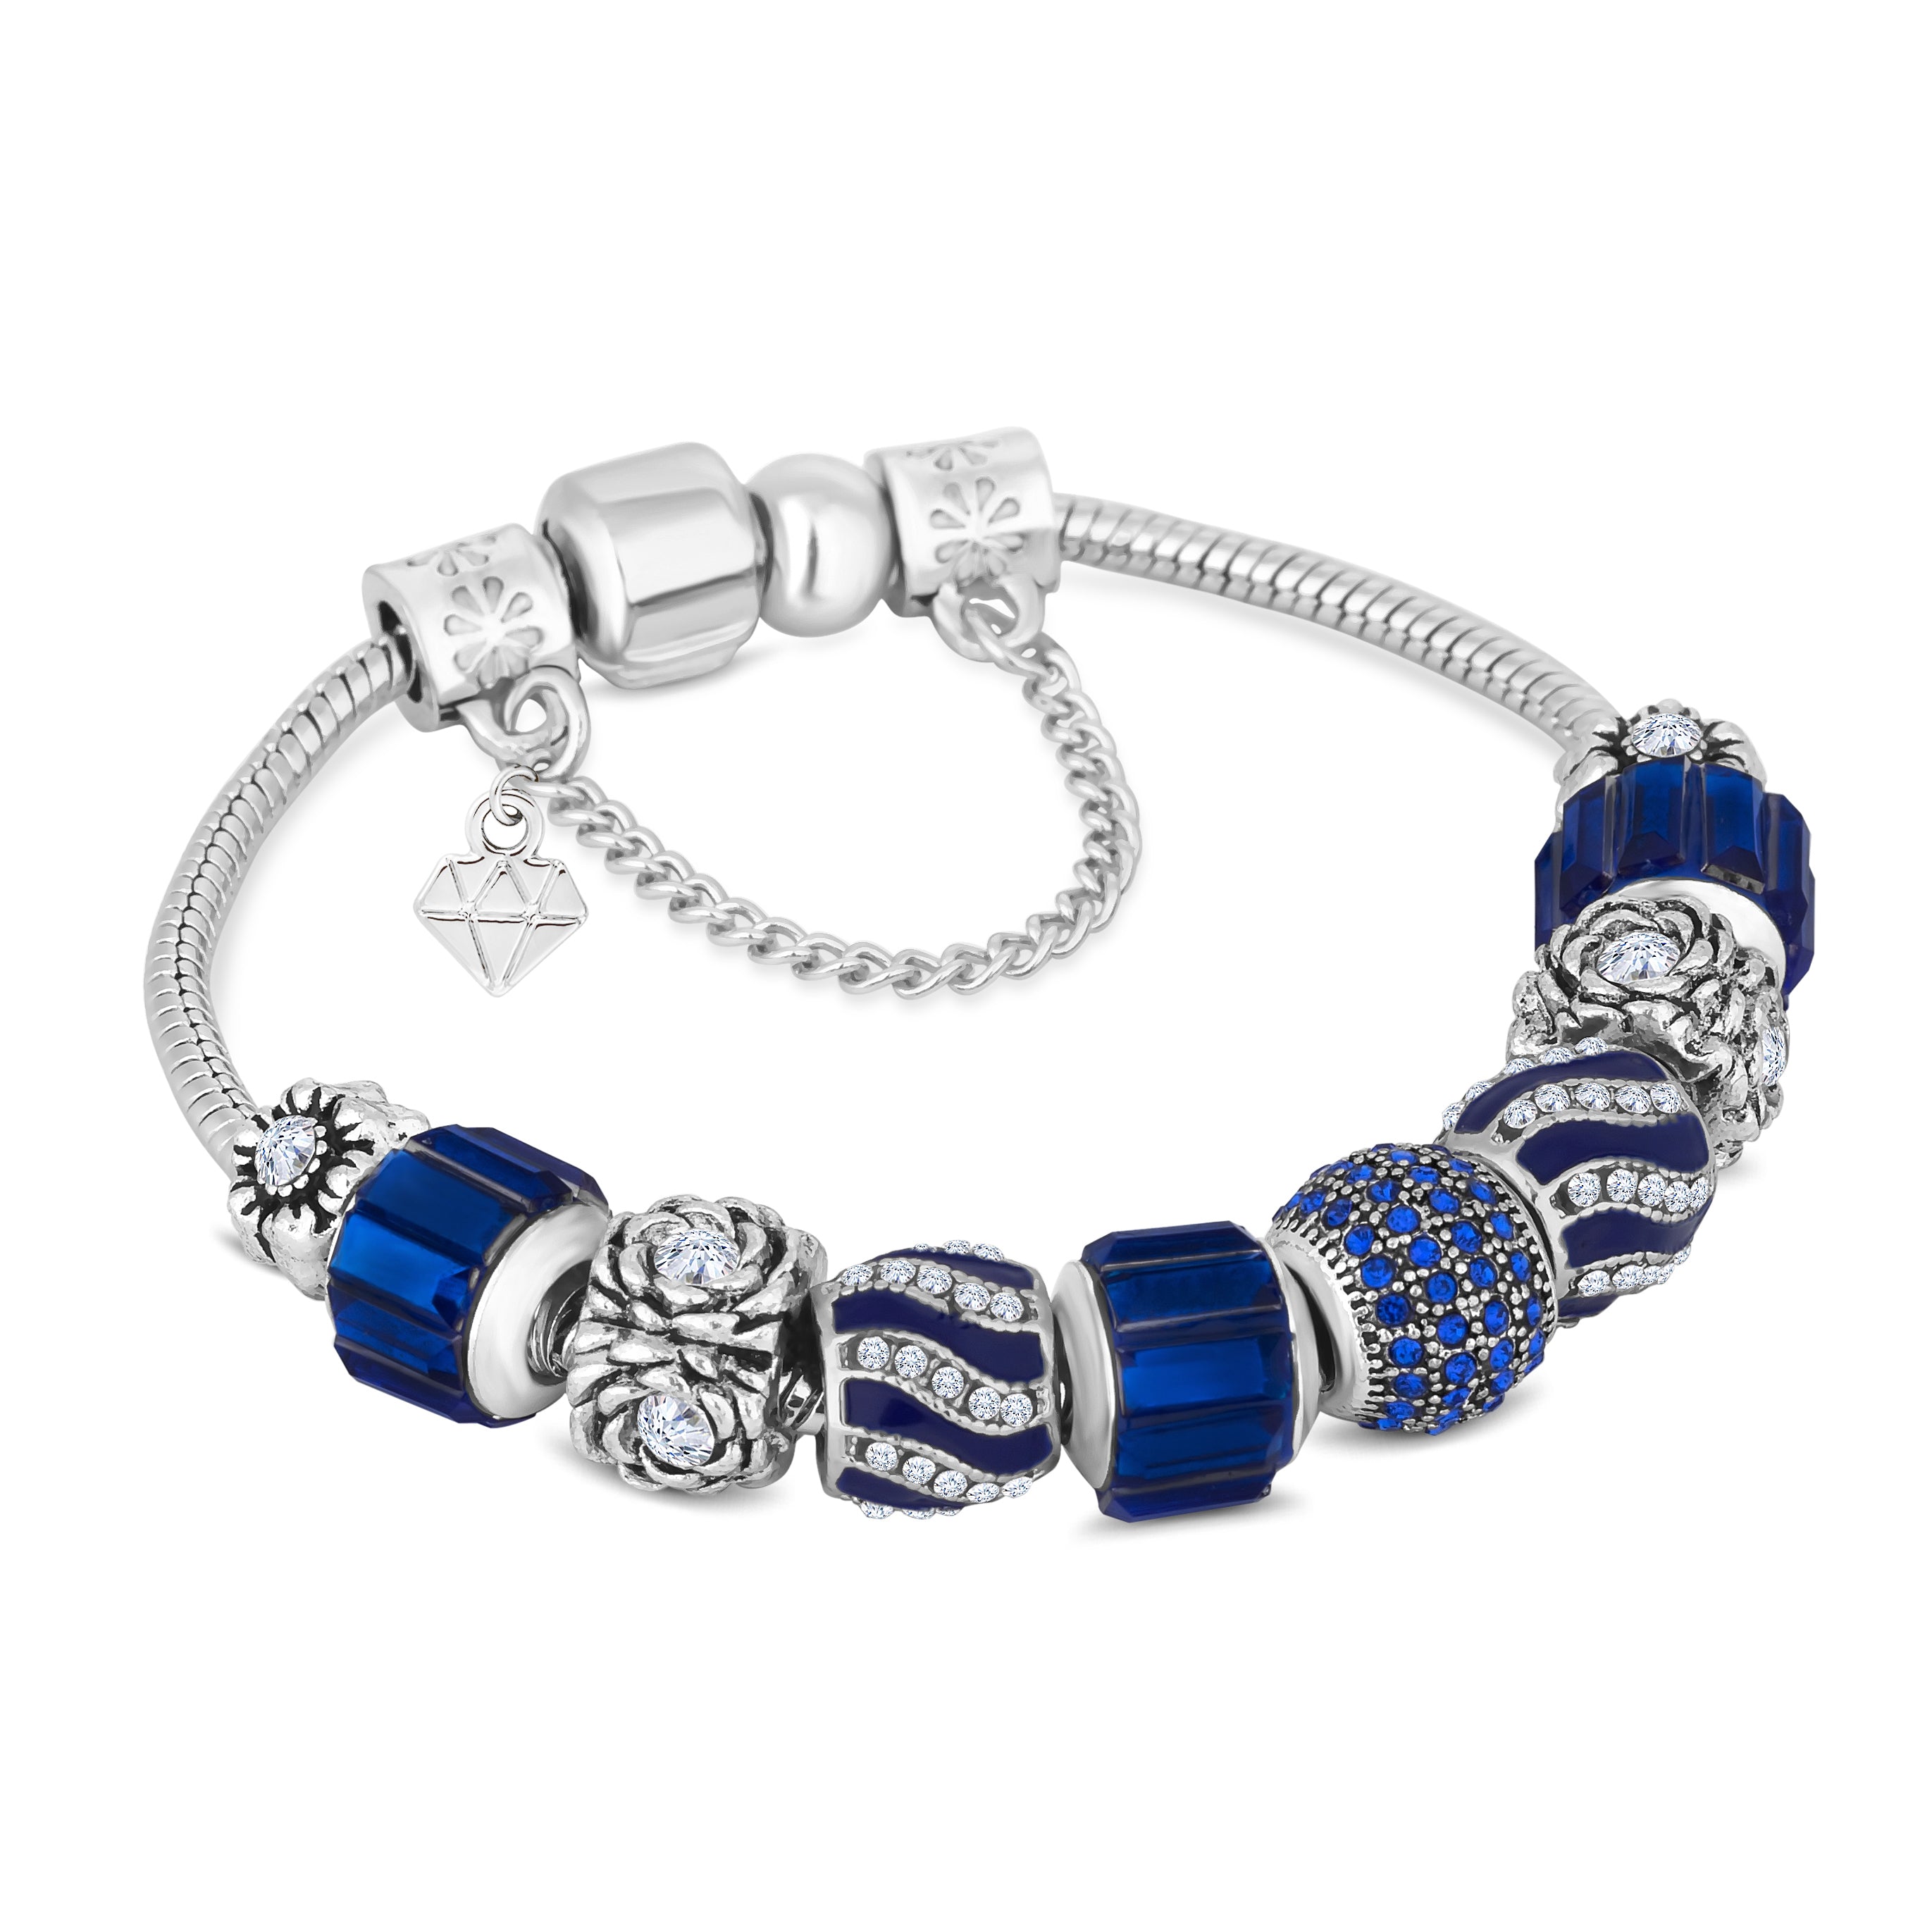 Charm Bracelet with Royal Blue Charms